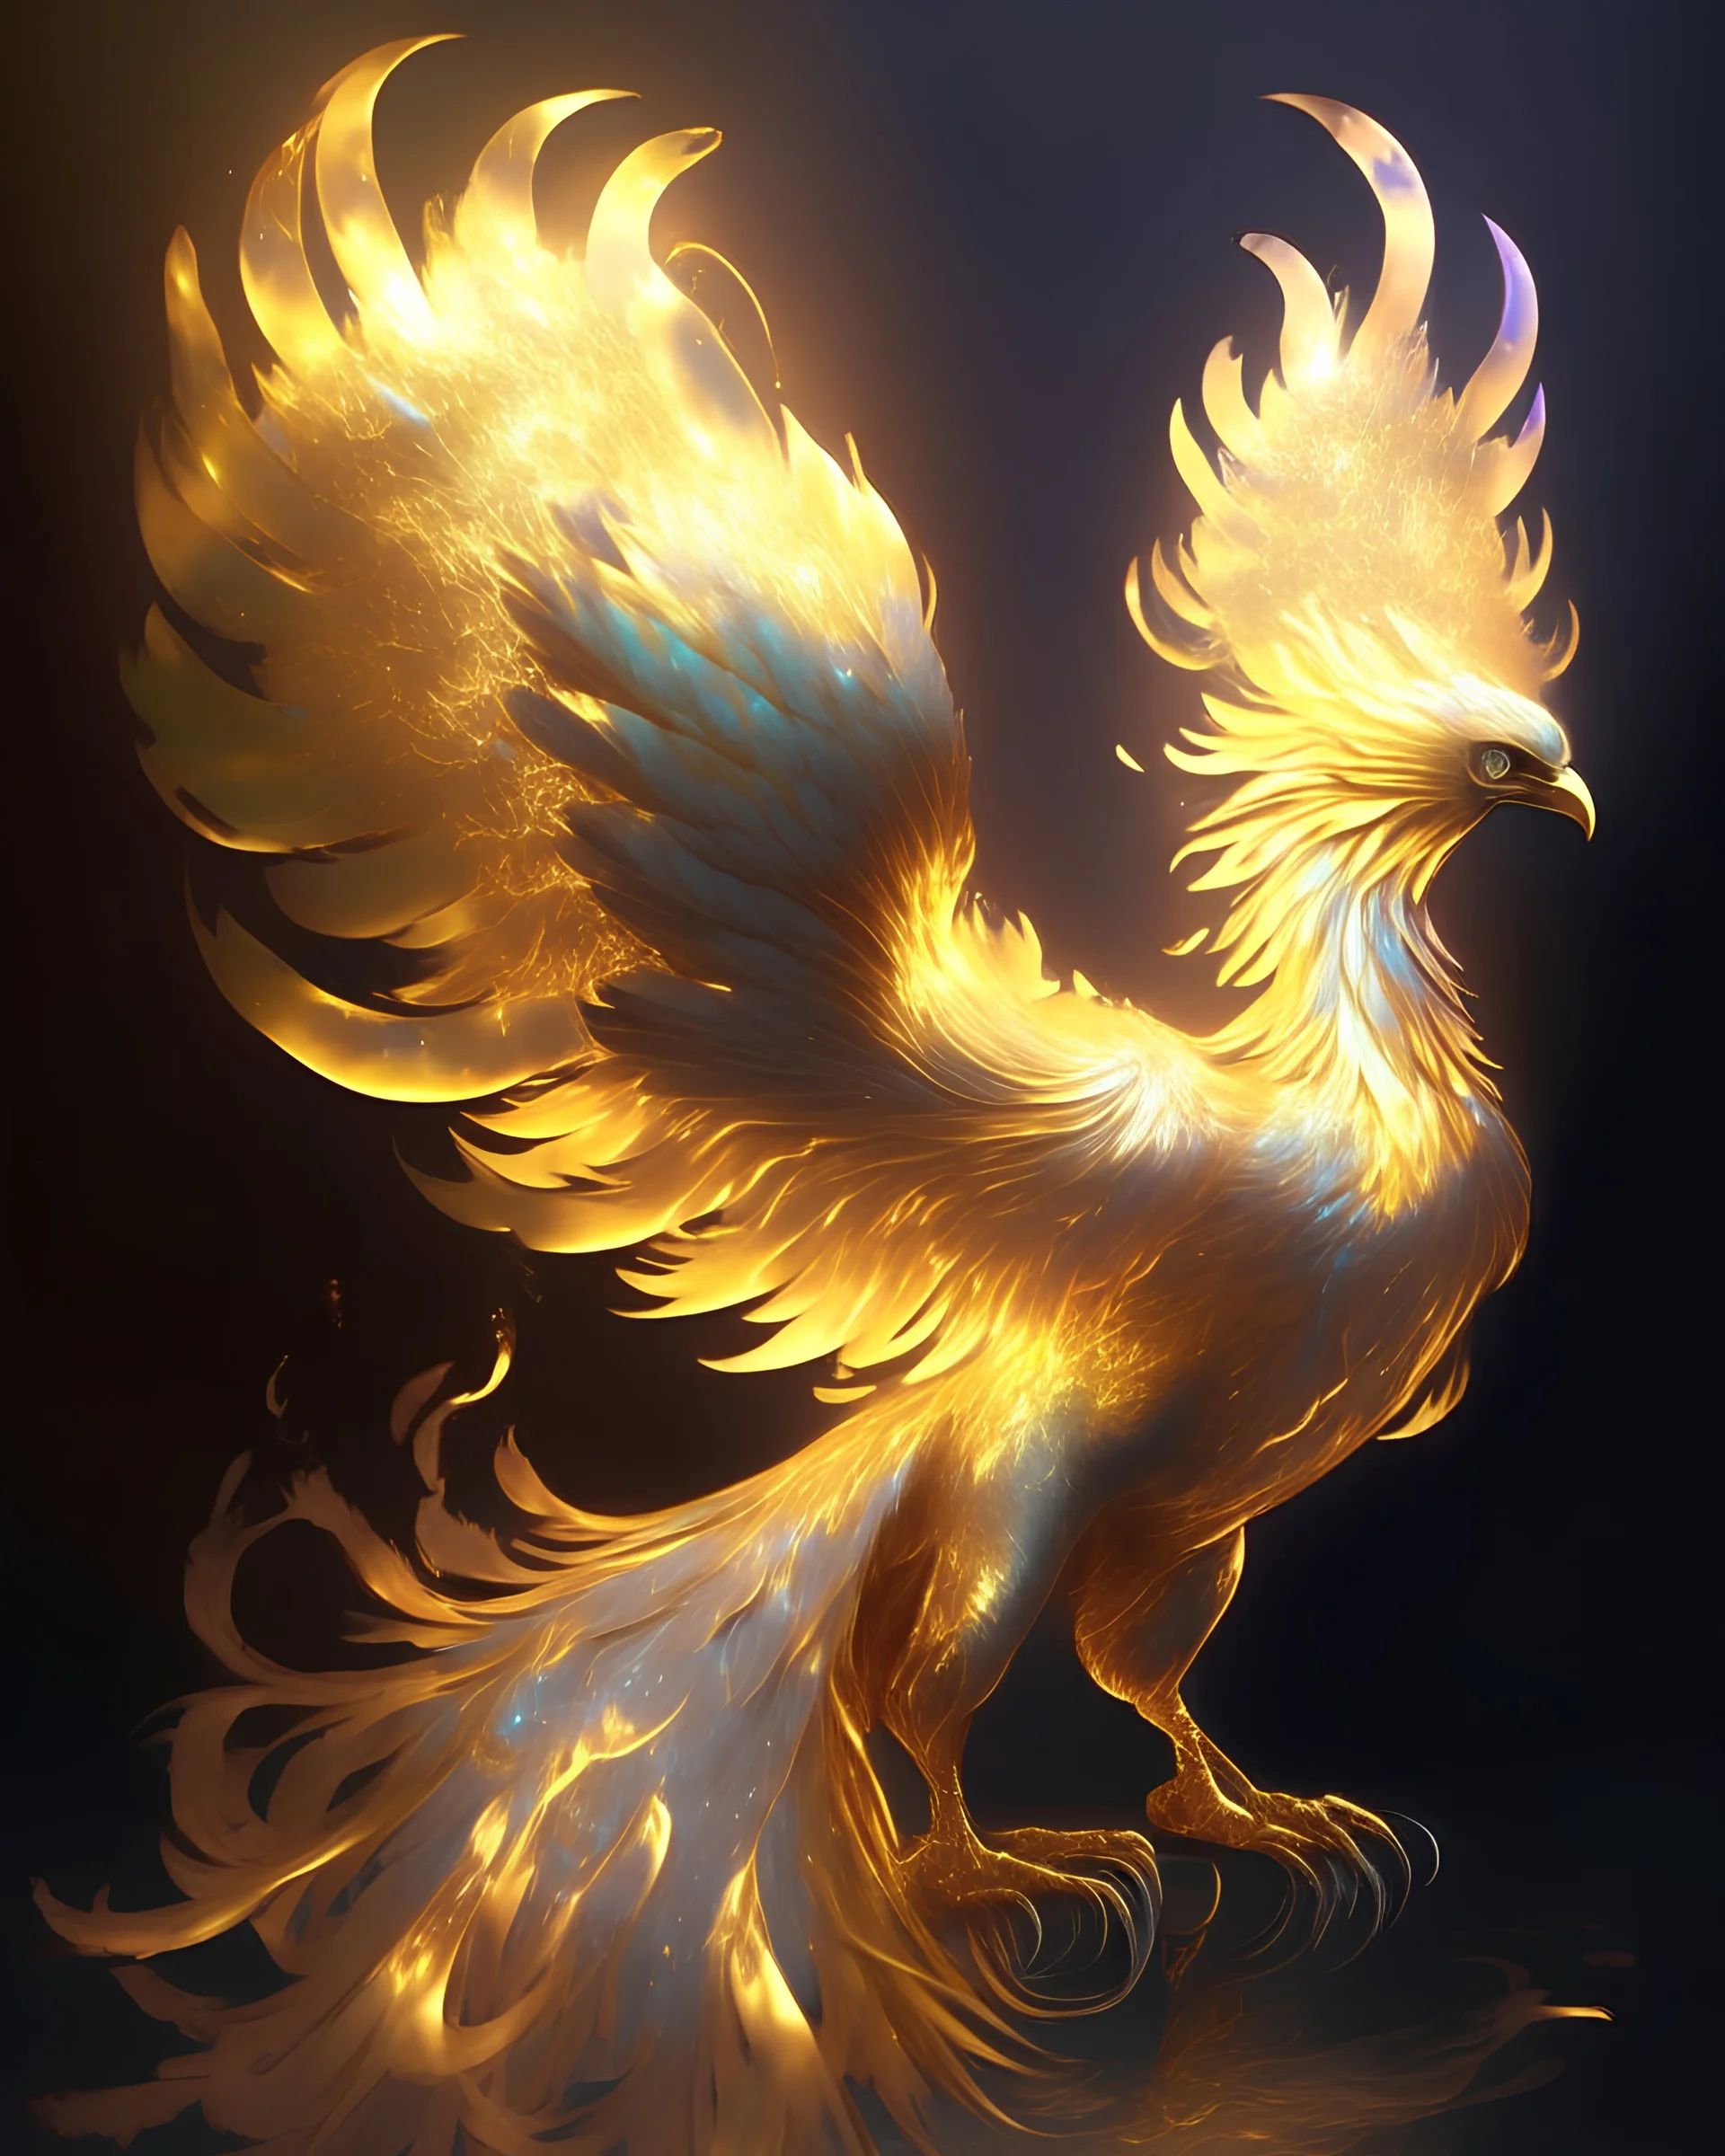 A golden phoenix with an iridescent plumage that emits a warm, shimmering glow, symbolizing rebirth and renewal.